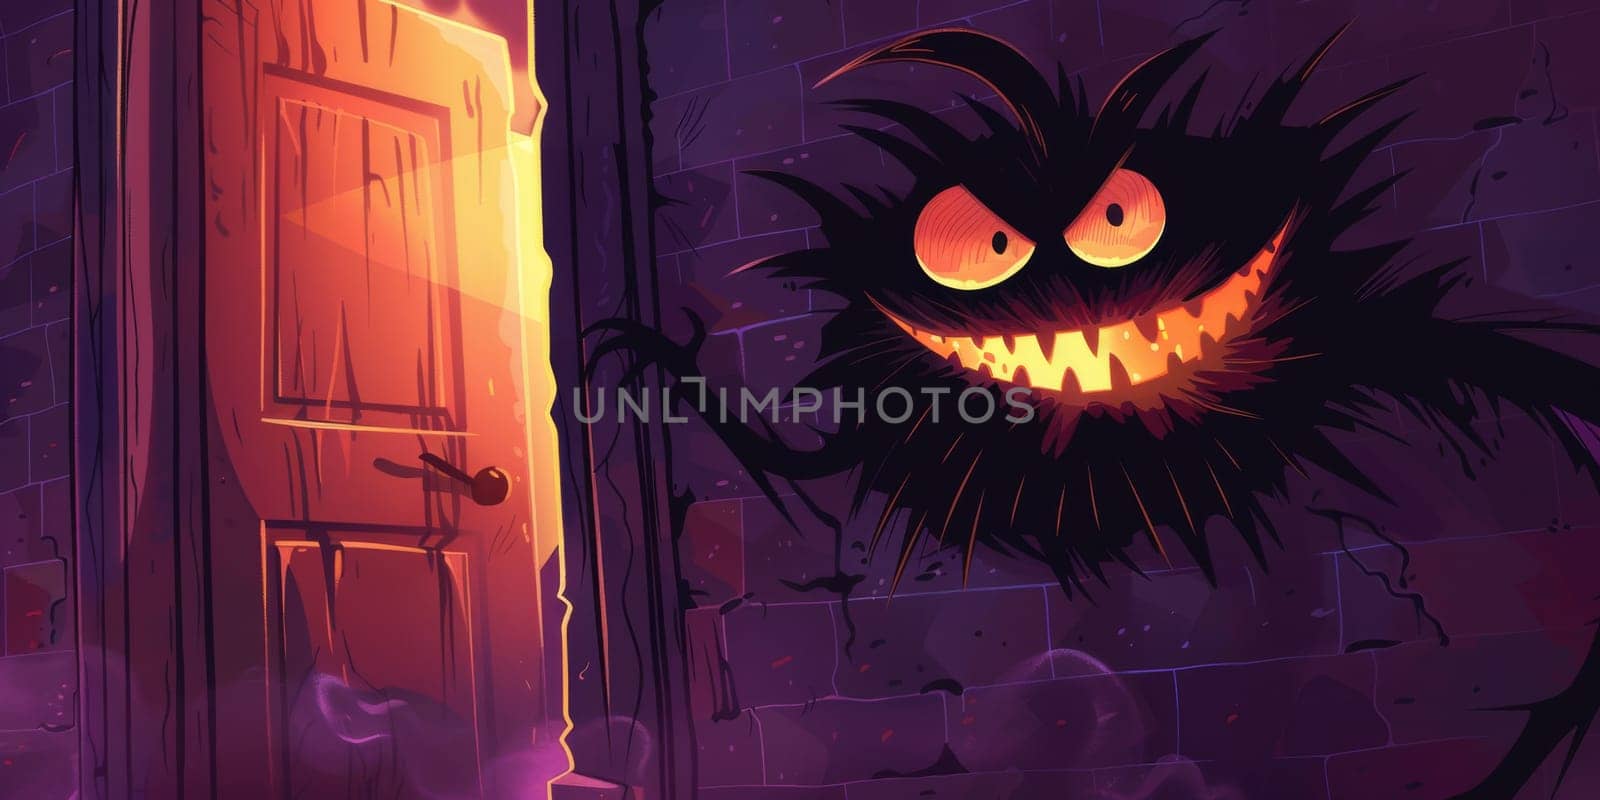 Fear of the dark behind the door, monster and abstract creature by Kadula